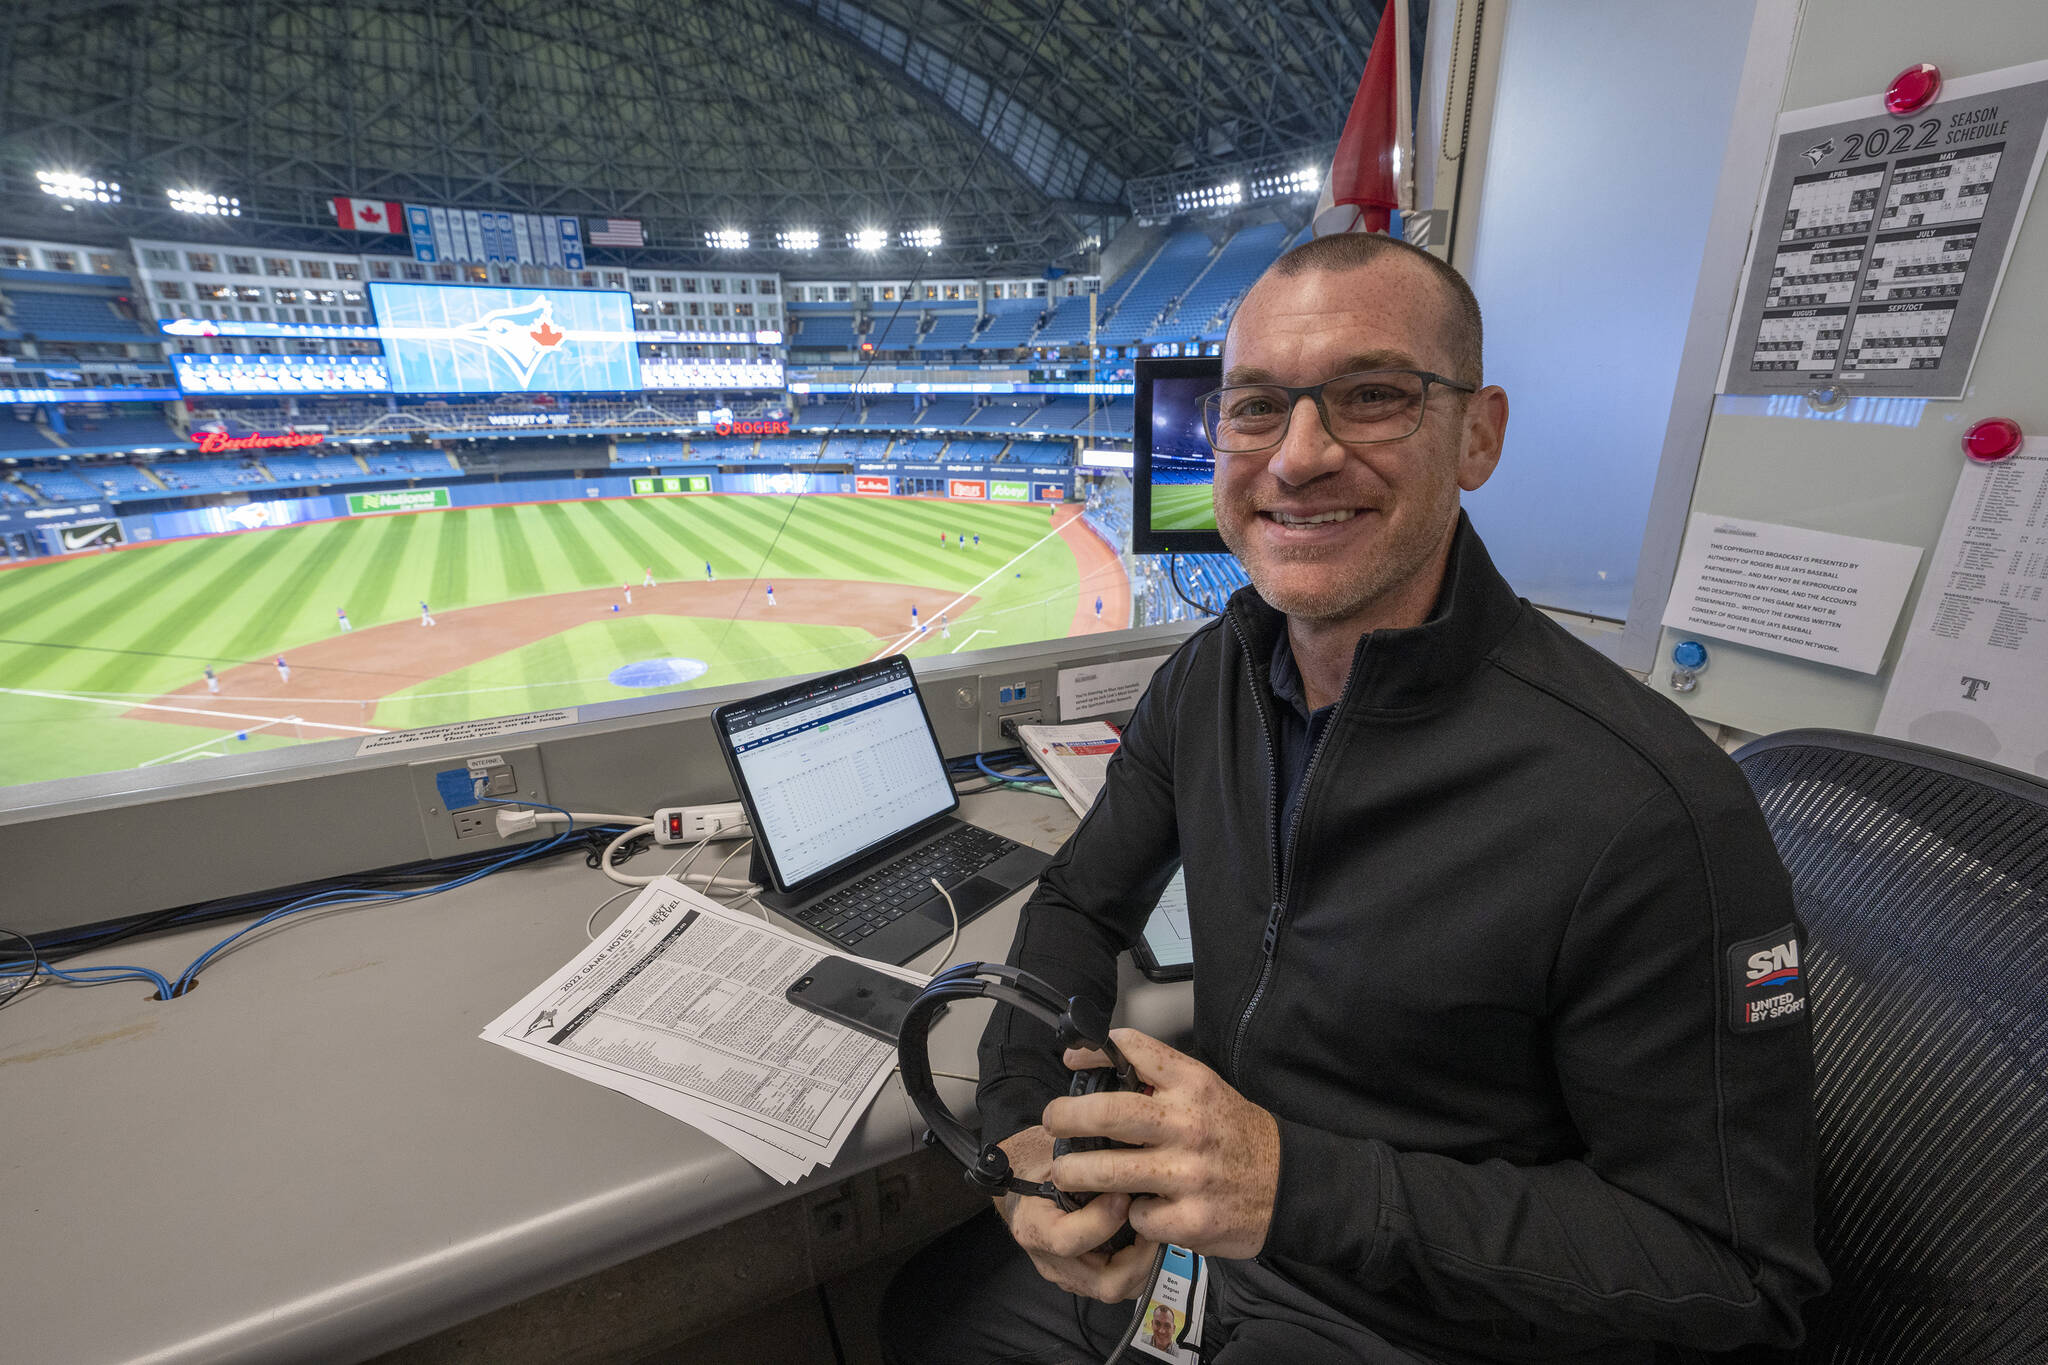 Toronto Blue Jays announcer Ben Wagner sits in the broadcast booth in Toronto, Sunday, April 10, 2022. Sportsnet, the Blue Jays’ radio rightsholder, will not resume on-site radio broadcasts for the 2023 regular season and will instead use remote coverage from its downtown Toronto studio for road games. THE CANADIAN PRESS/Frank Gunn